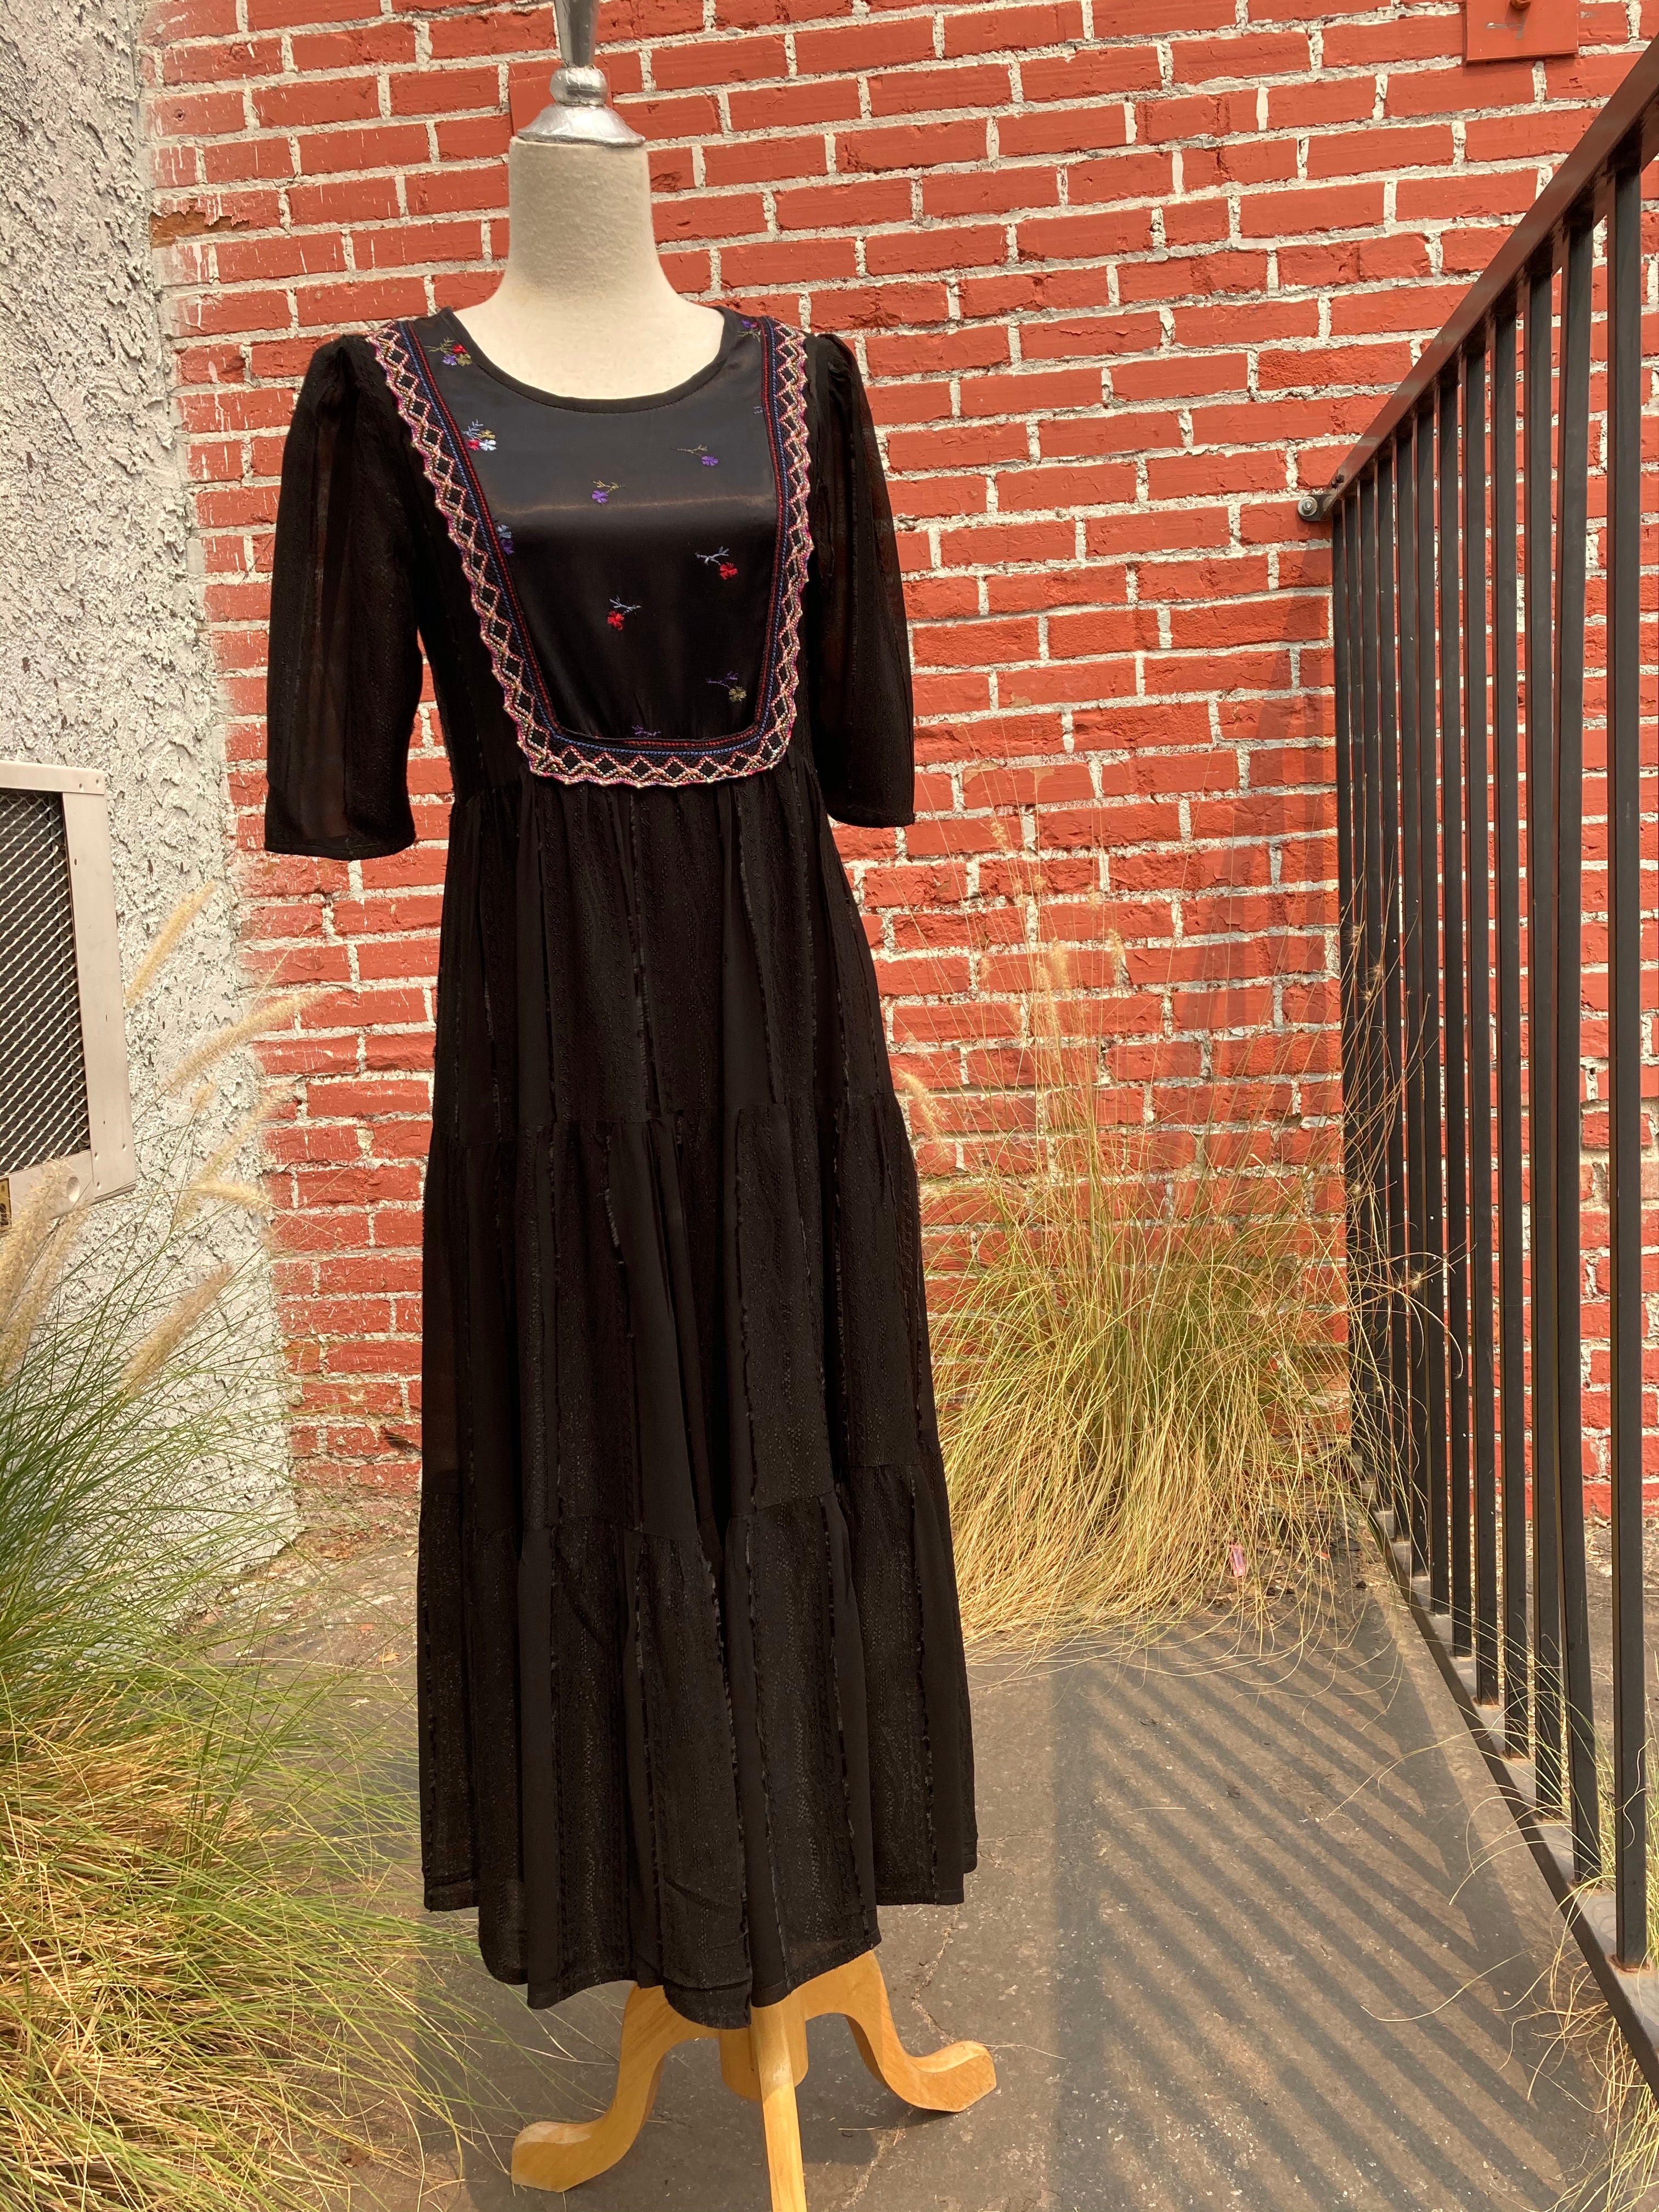 70’s style black smock dress with matching mask